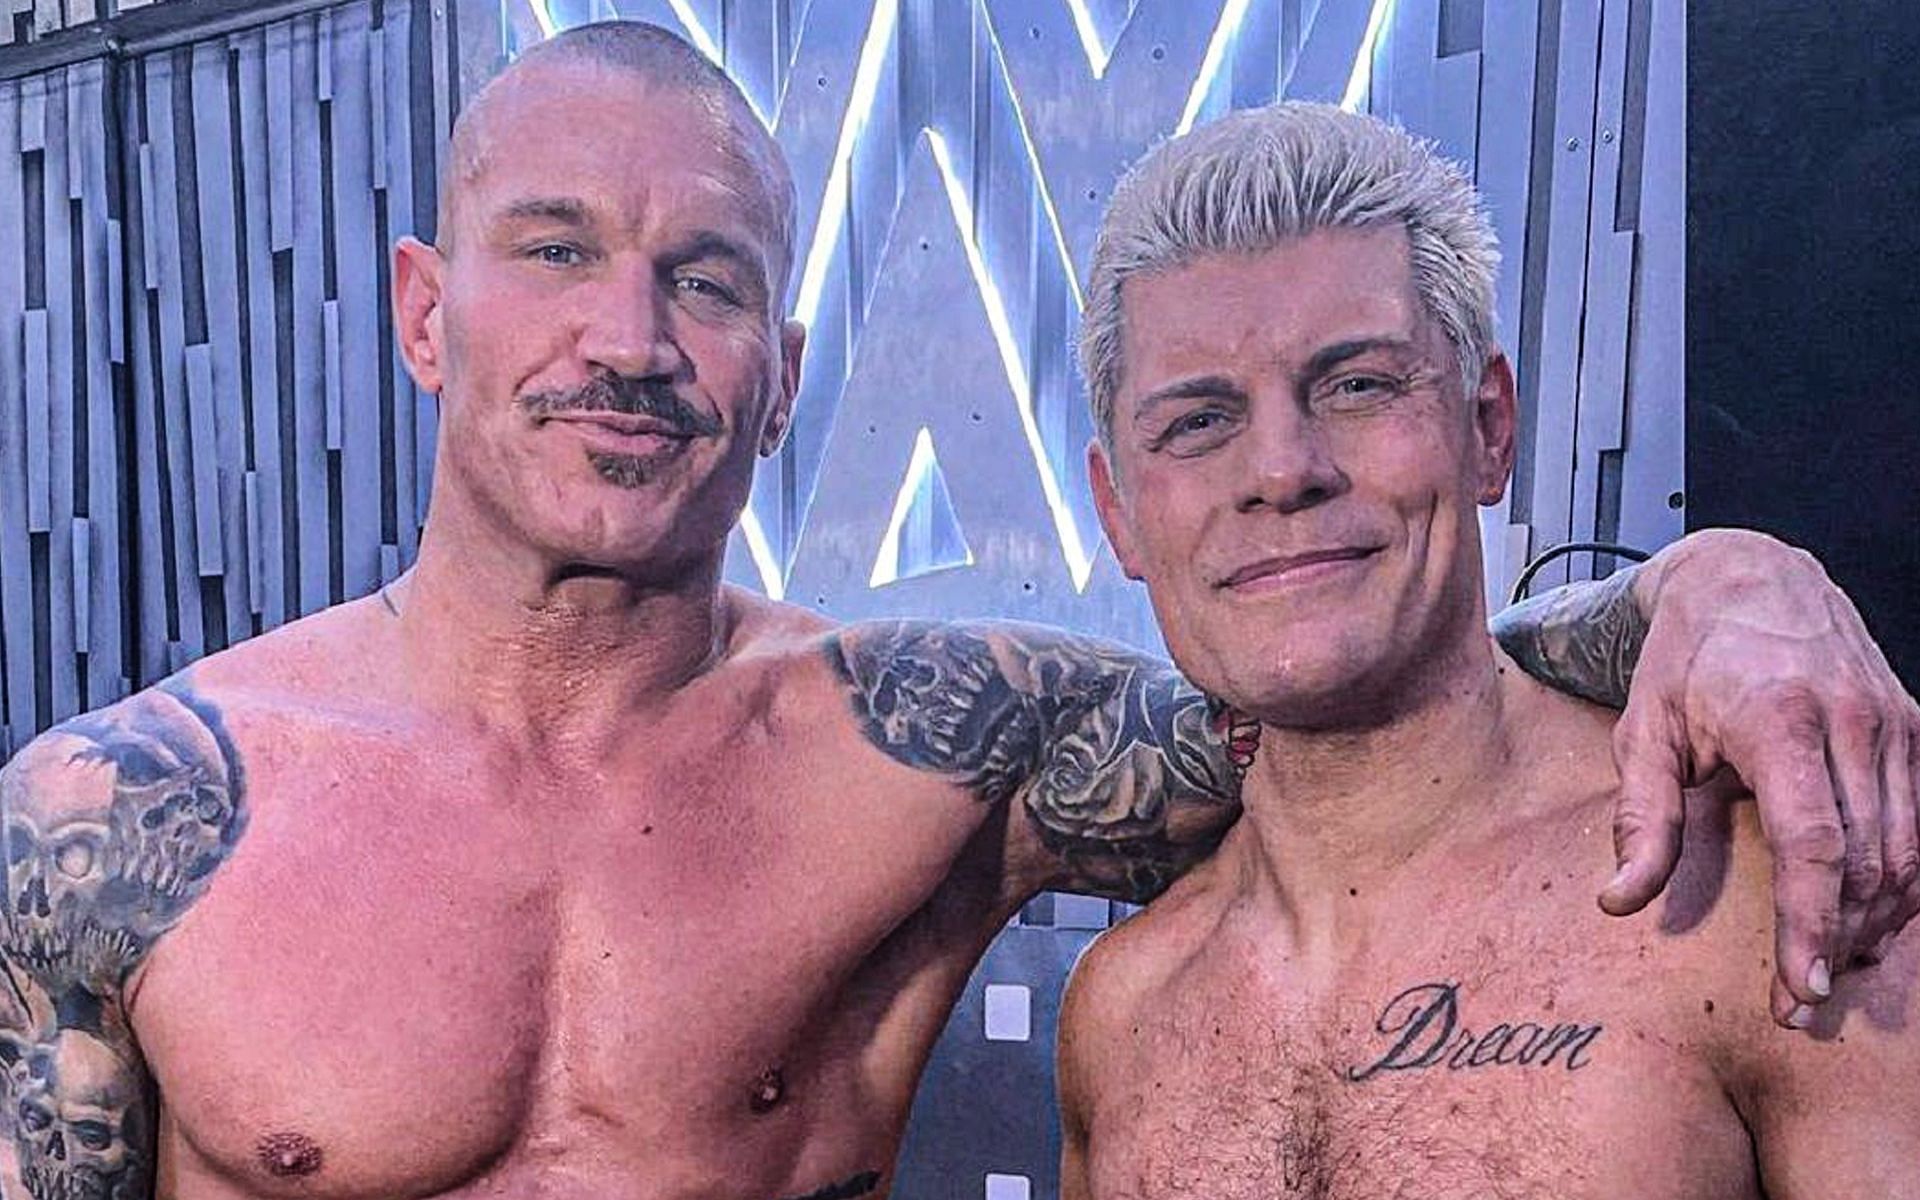 Randy Orton &amp; Cody Rhodes both are the members of Legacy faction